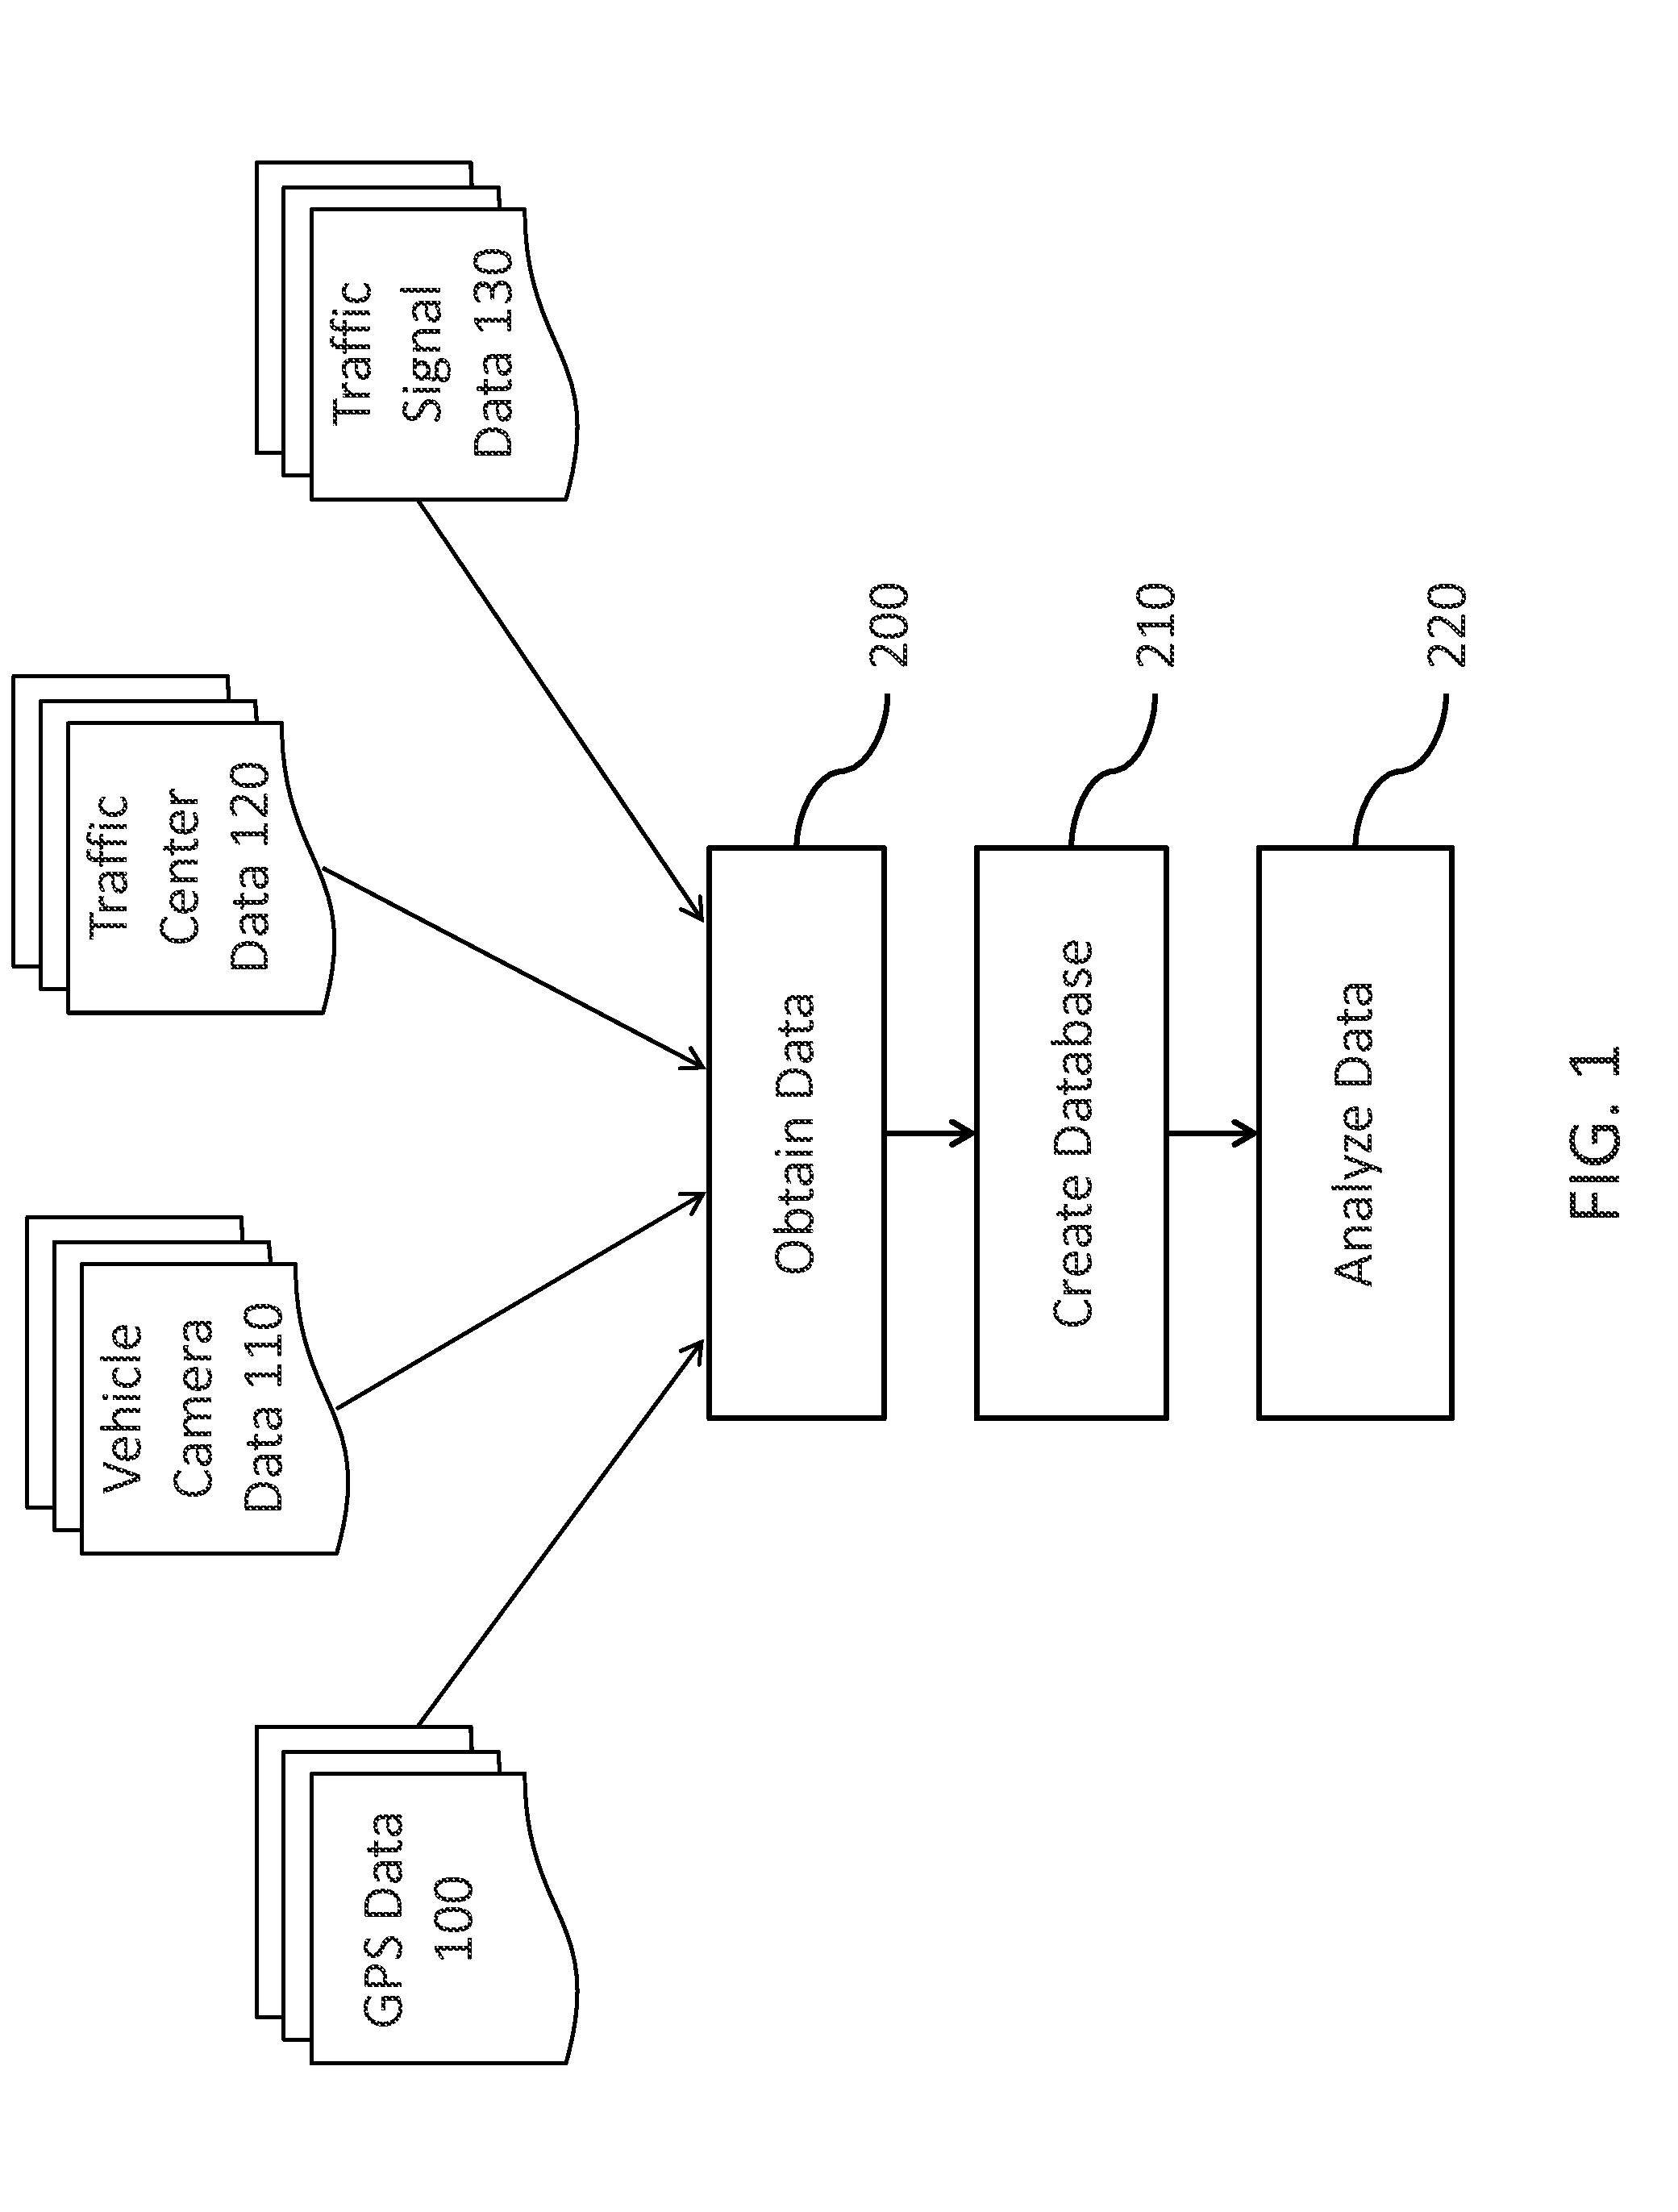 Systems and Methods for Predicting Traffic Signal Information